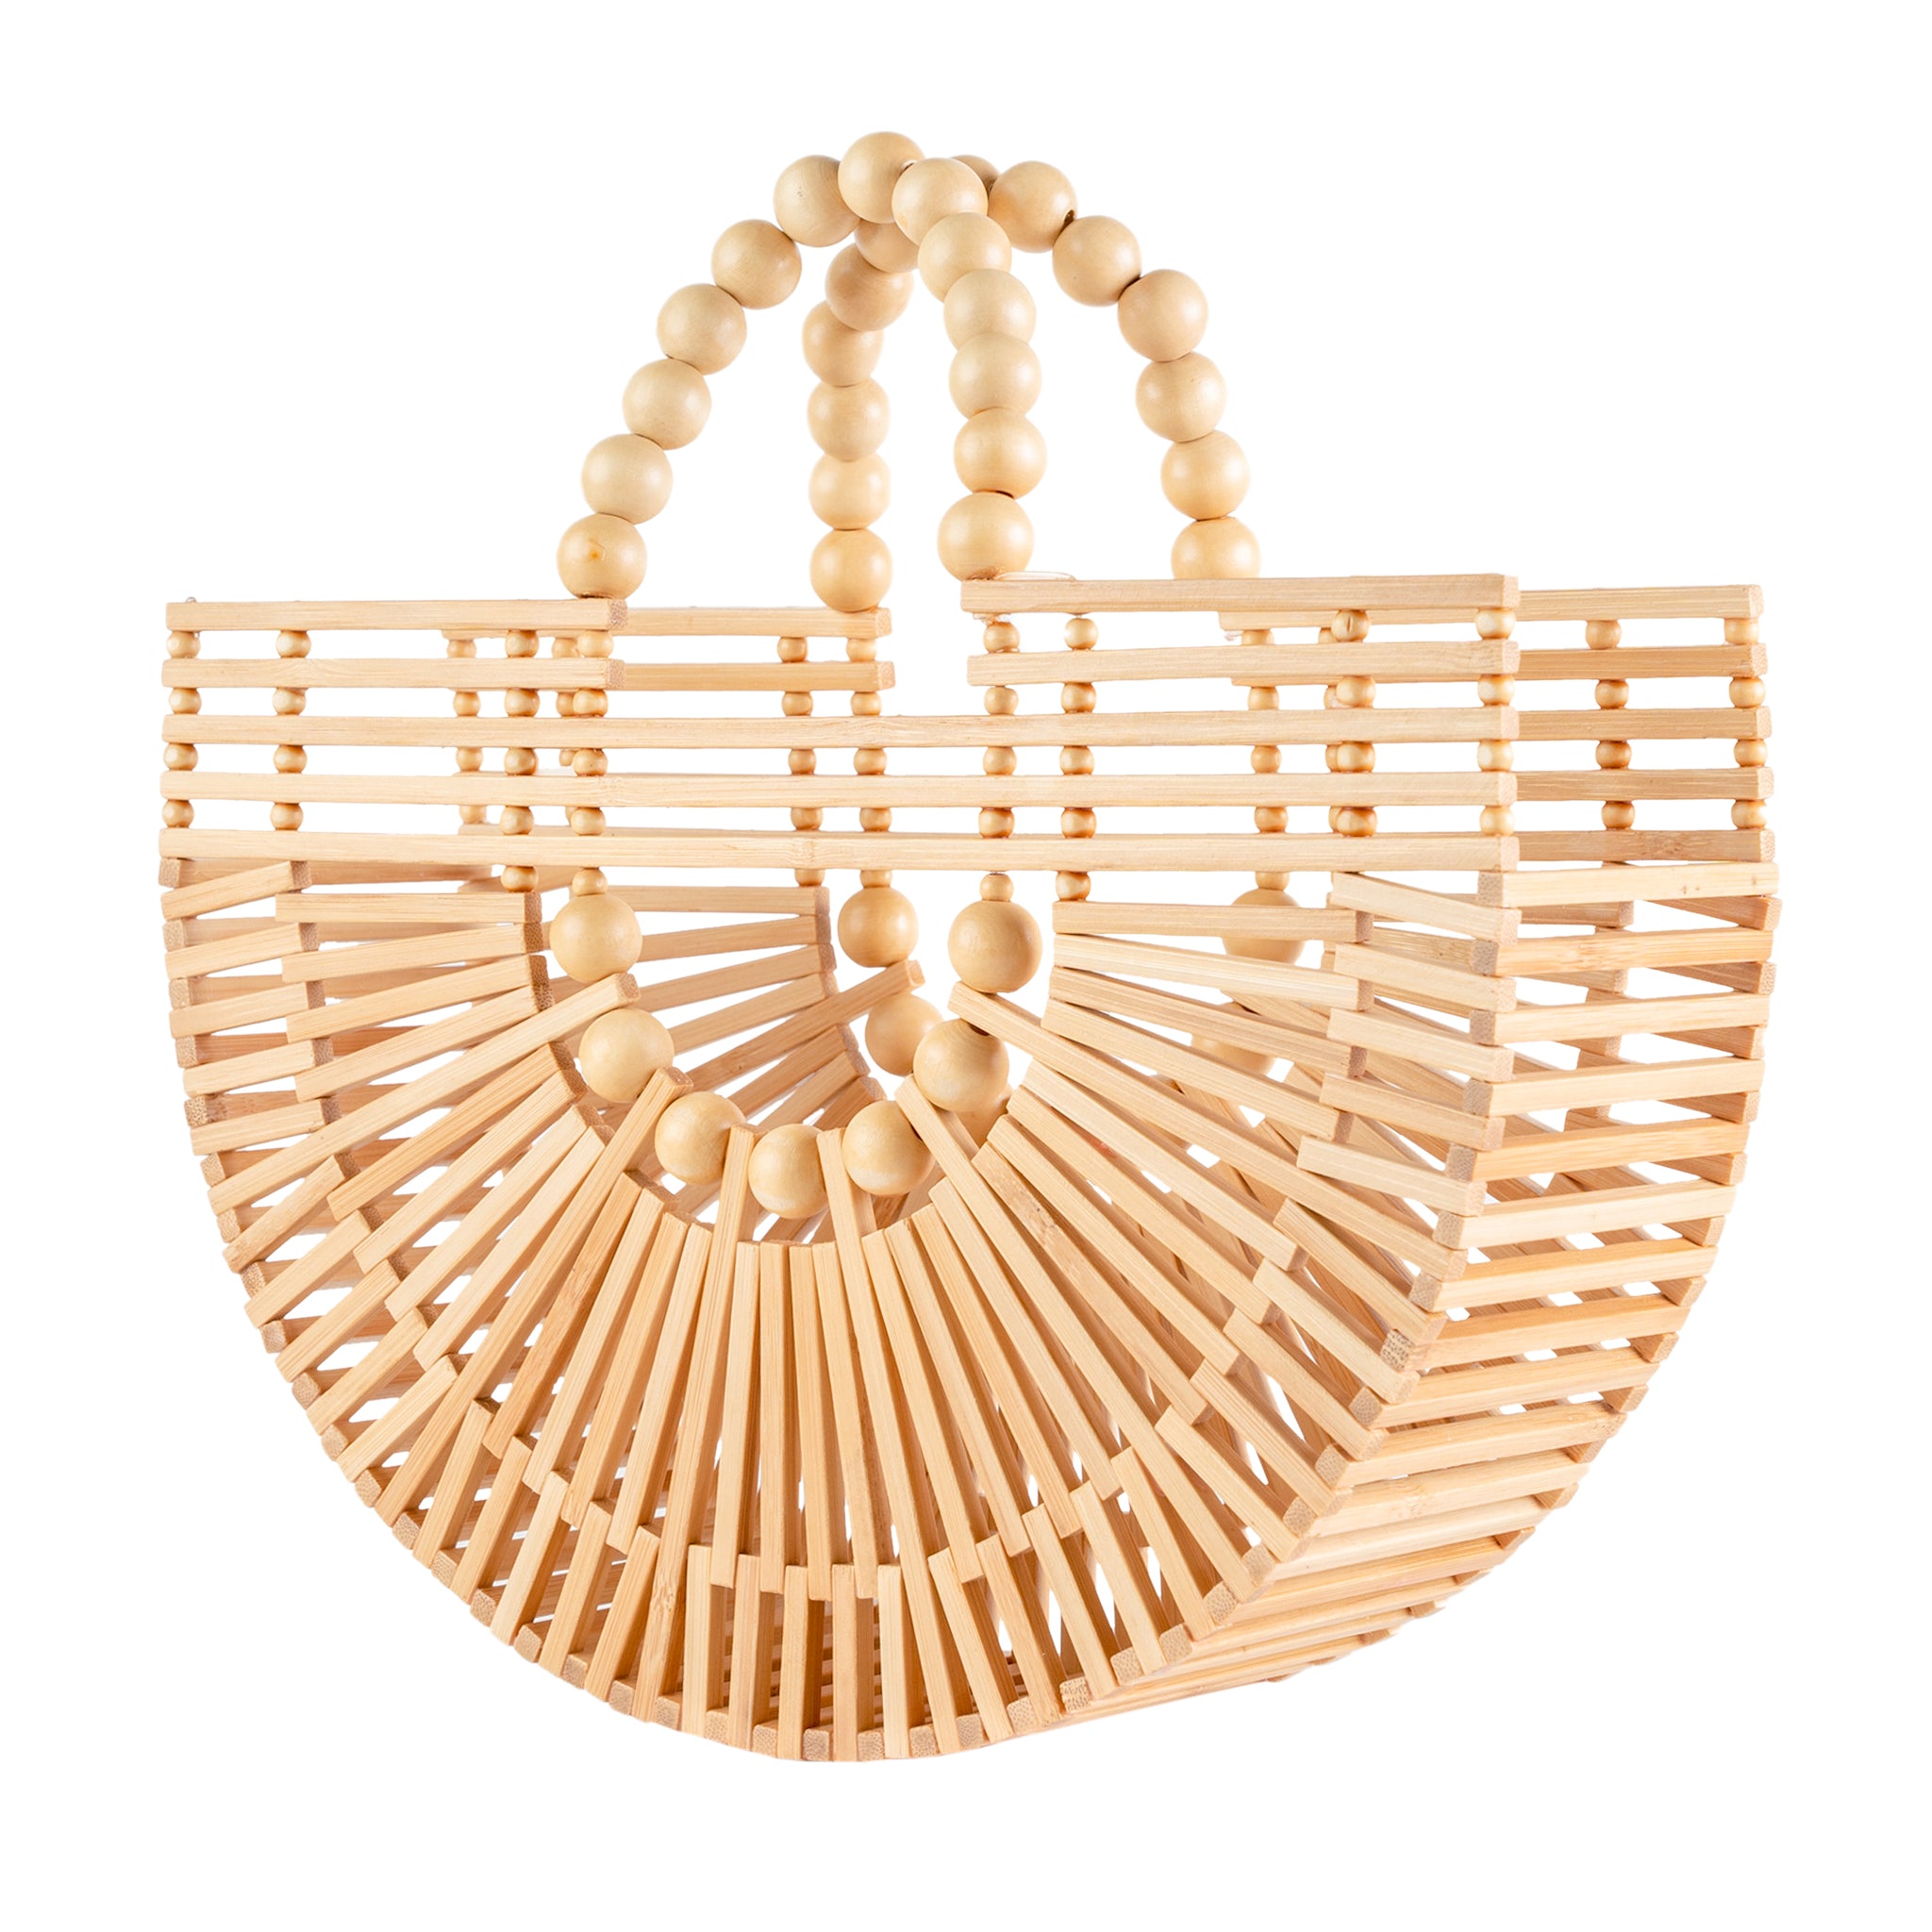 Bamboo Tote - Handcrafted Basket Bag for Women bamboo natural